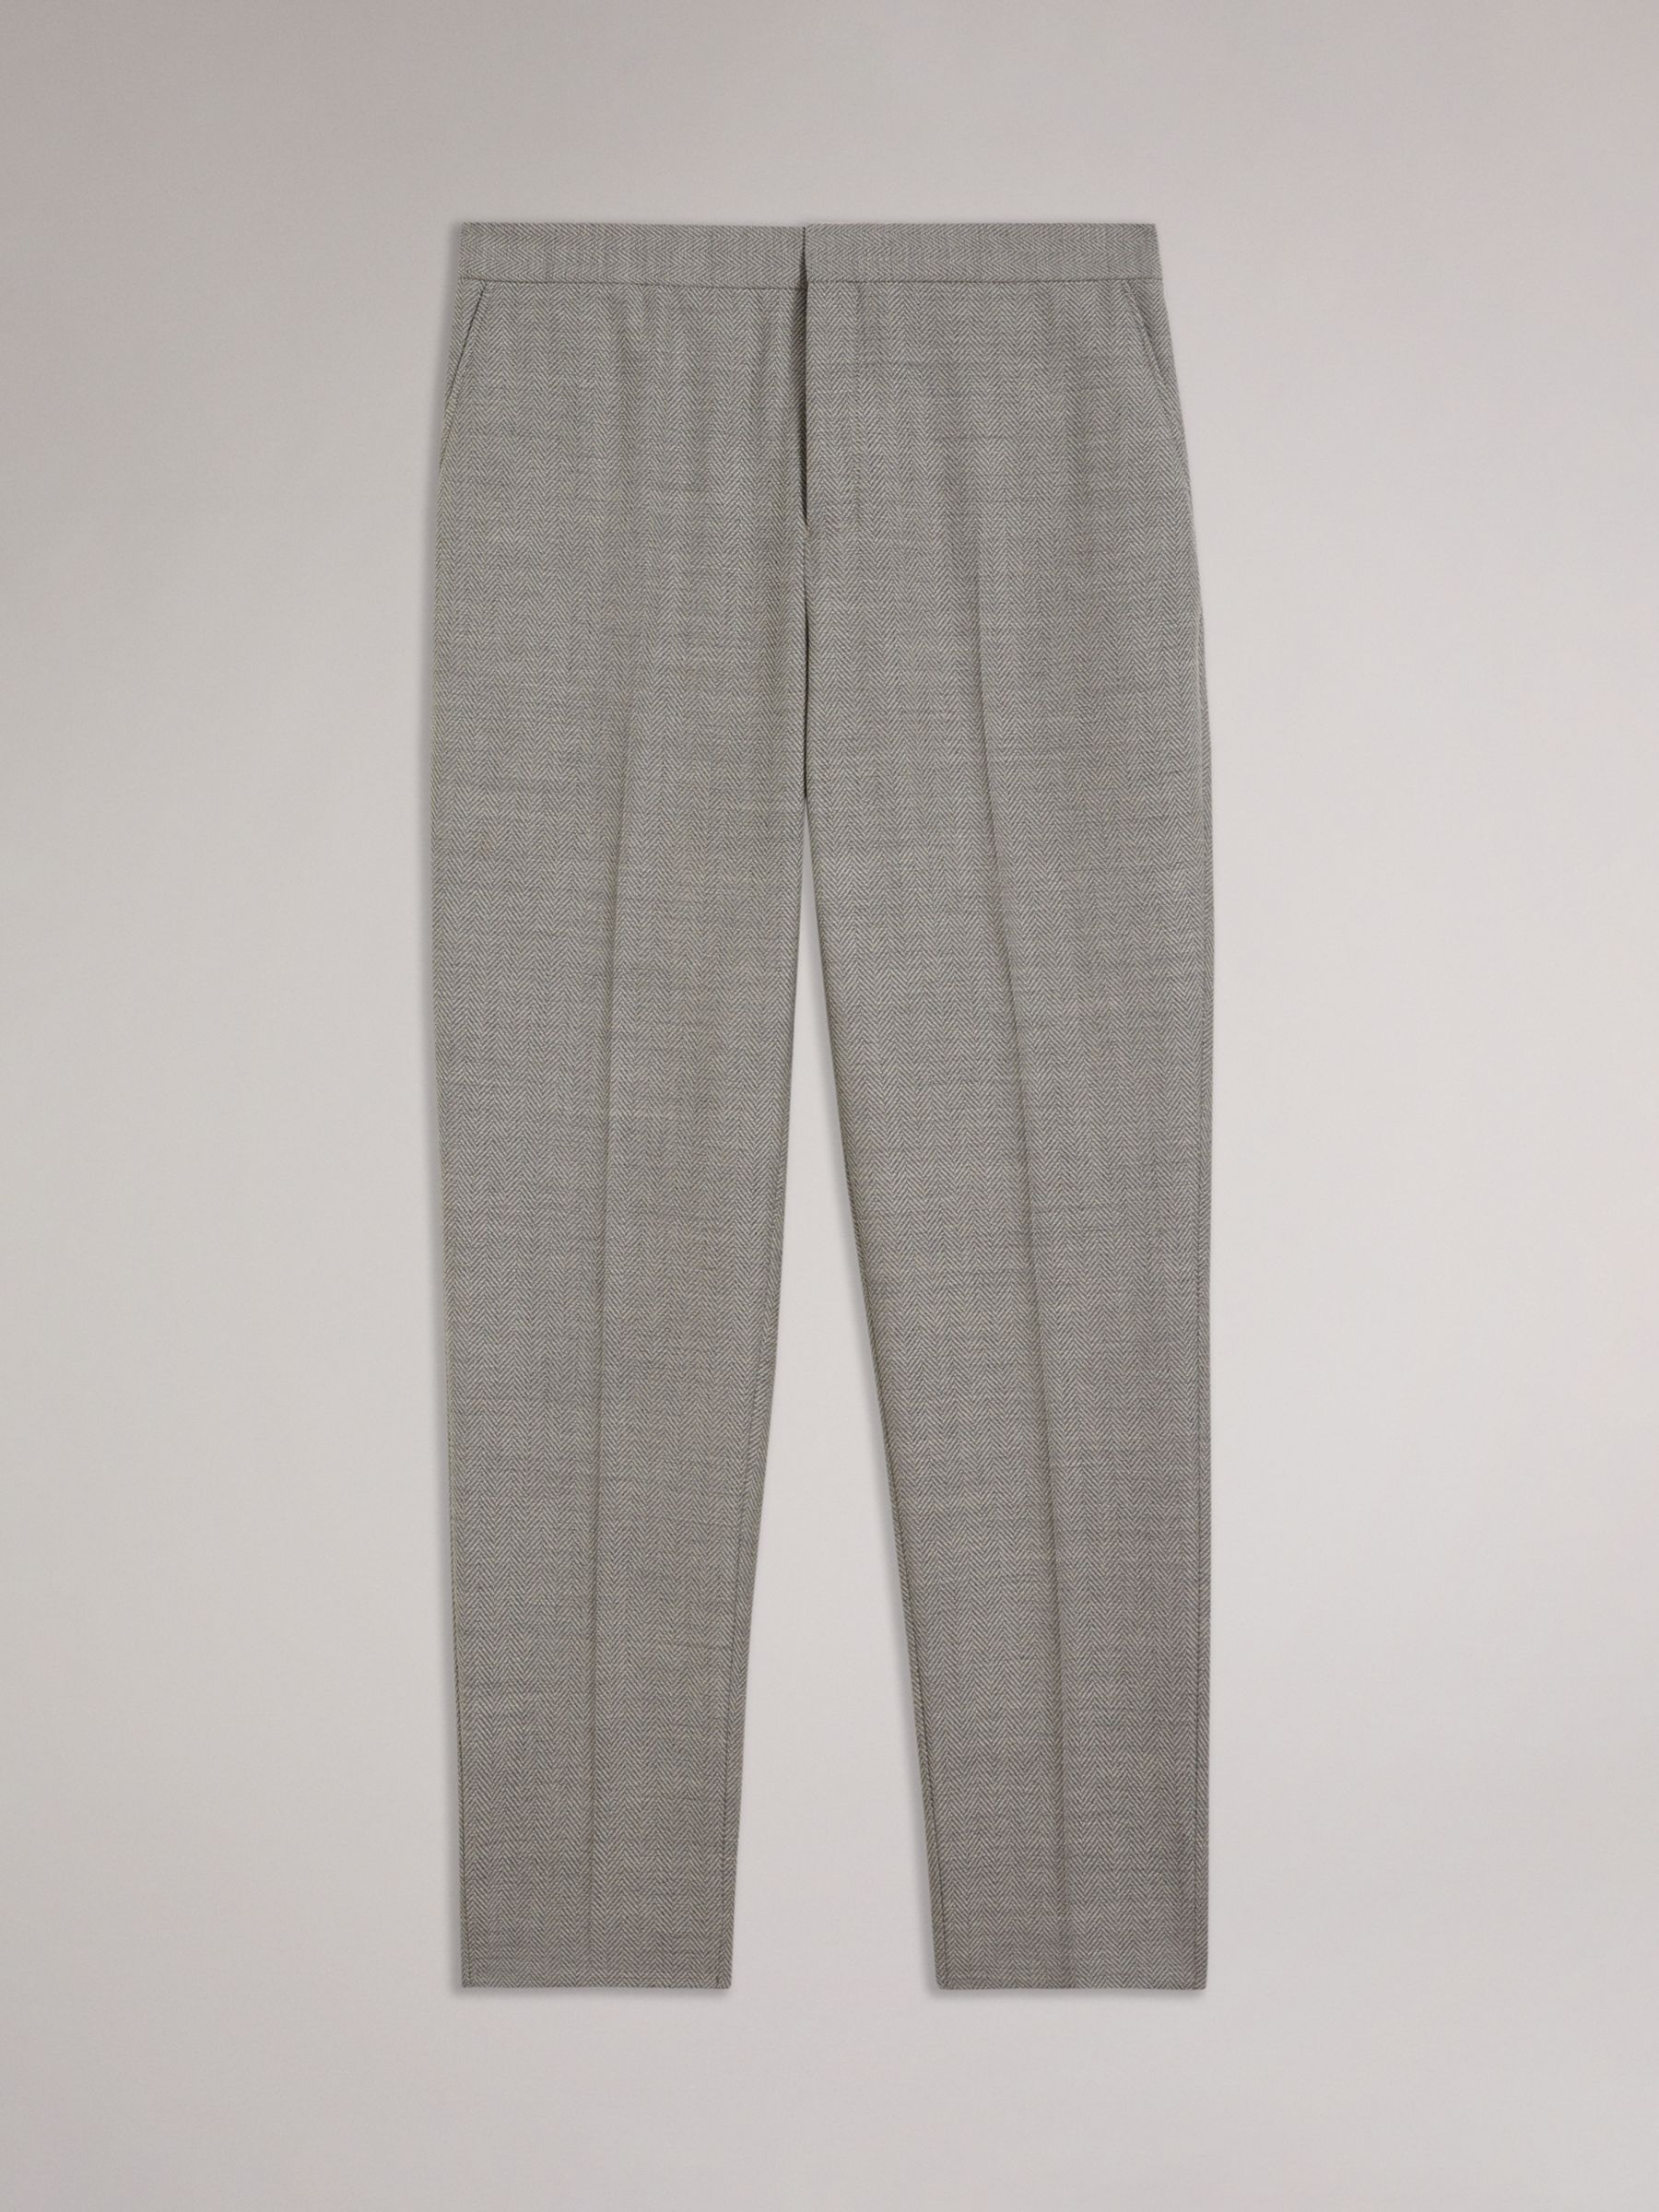 Ted Baker Lucca Slim Fit Trousers, Grey, 28R